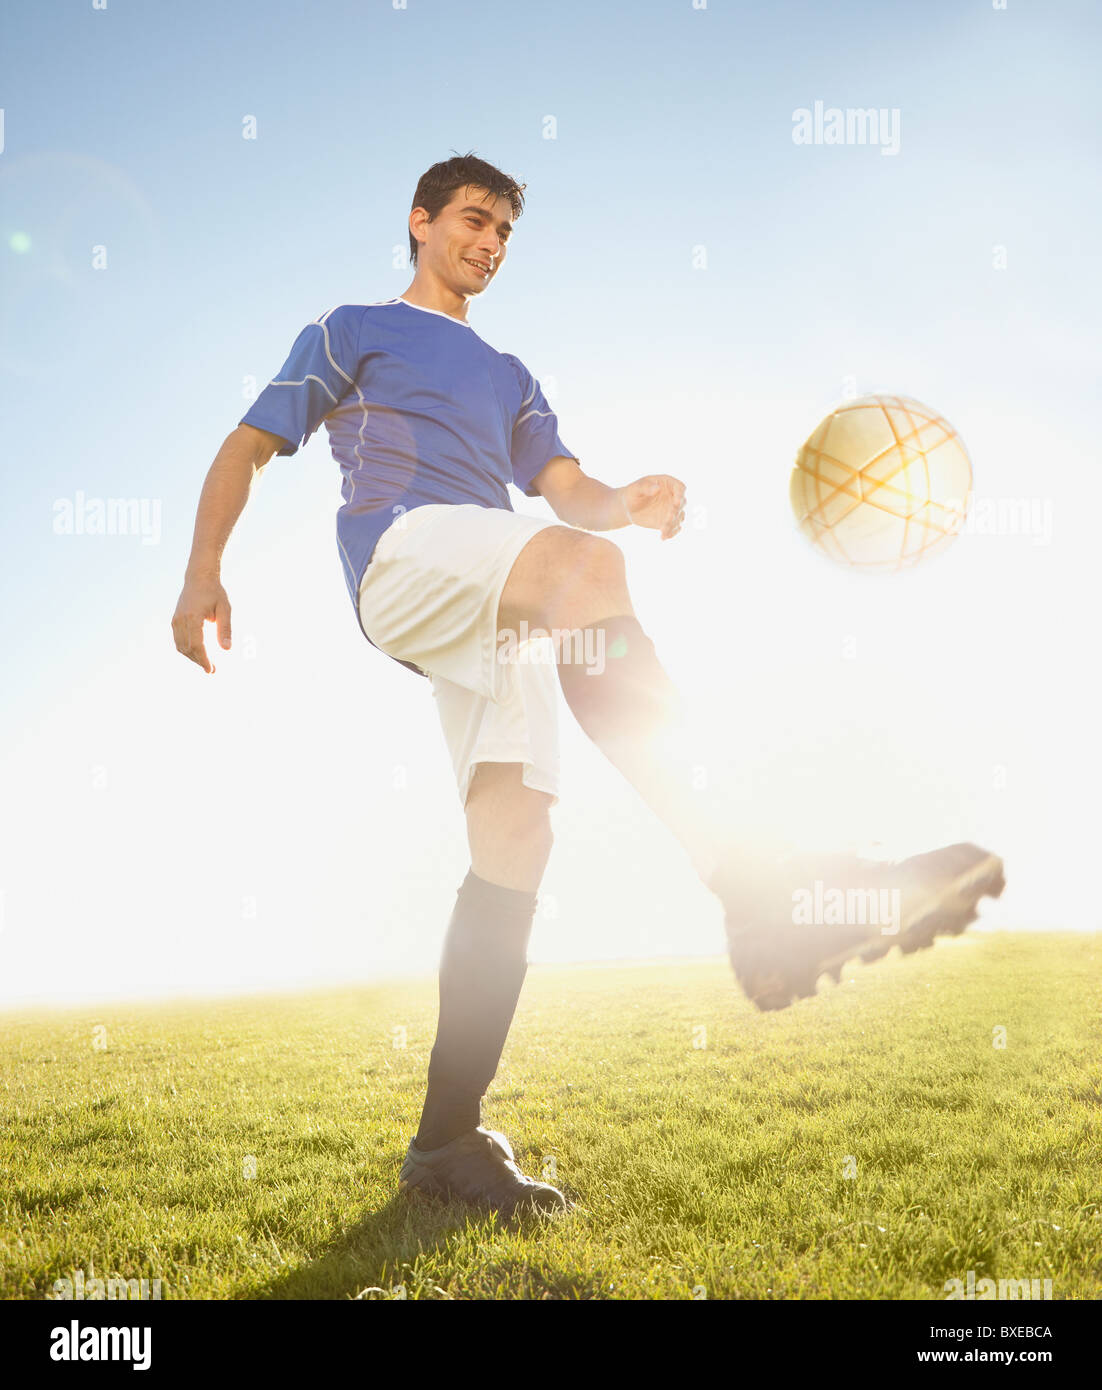 Soccer player Kicking the ball Banque D'Images